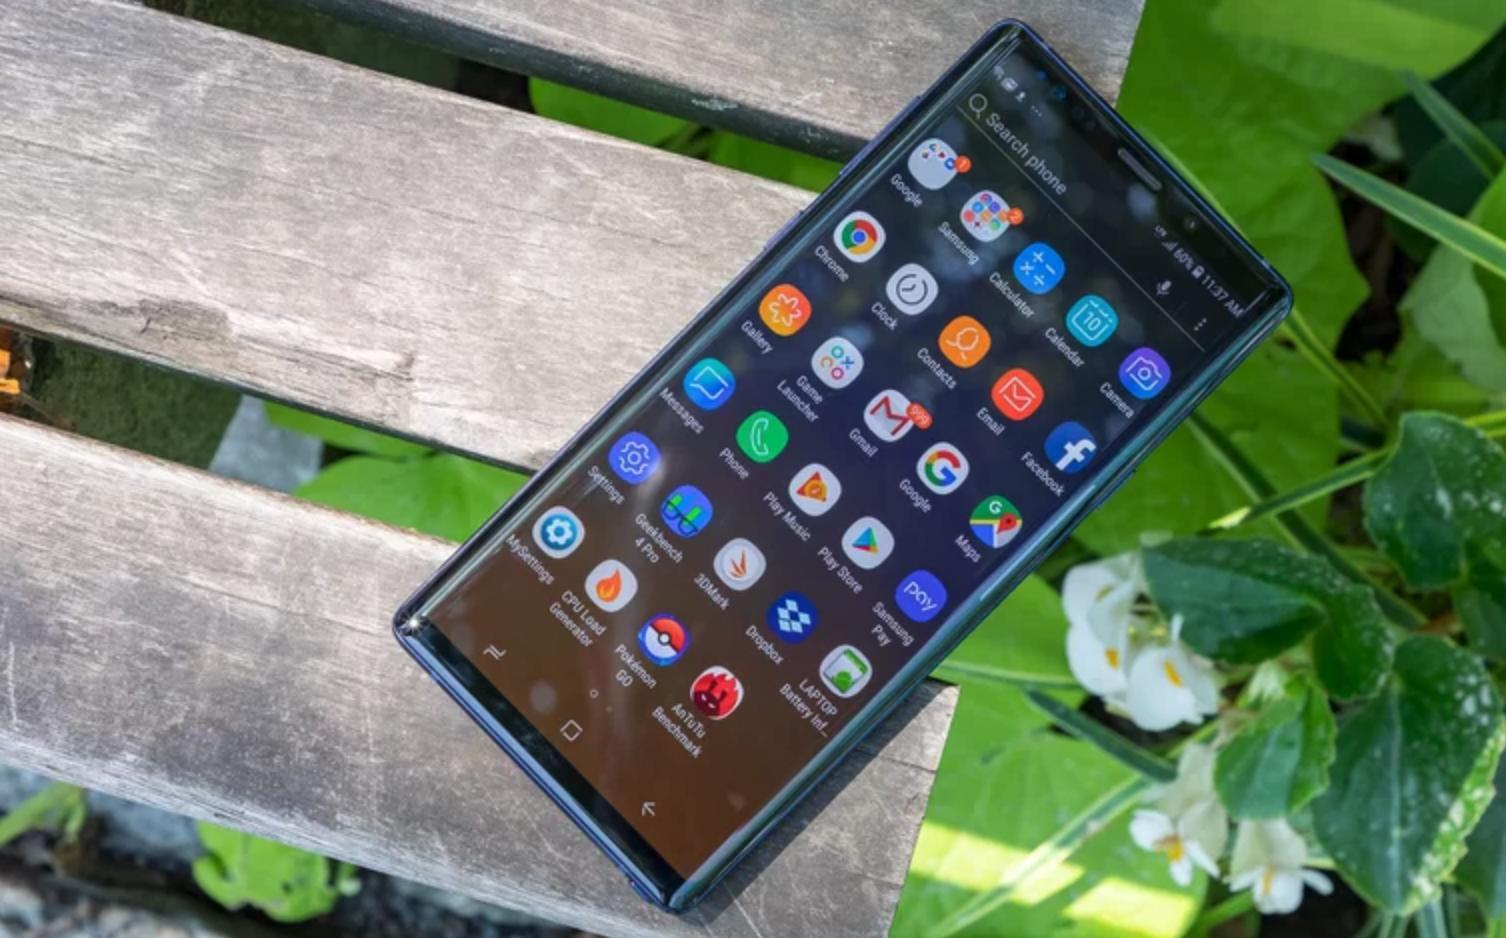 Galaxy Note 10 Leak: Very Fast Charging, Battery Size and Design Change